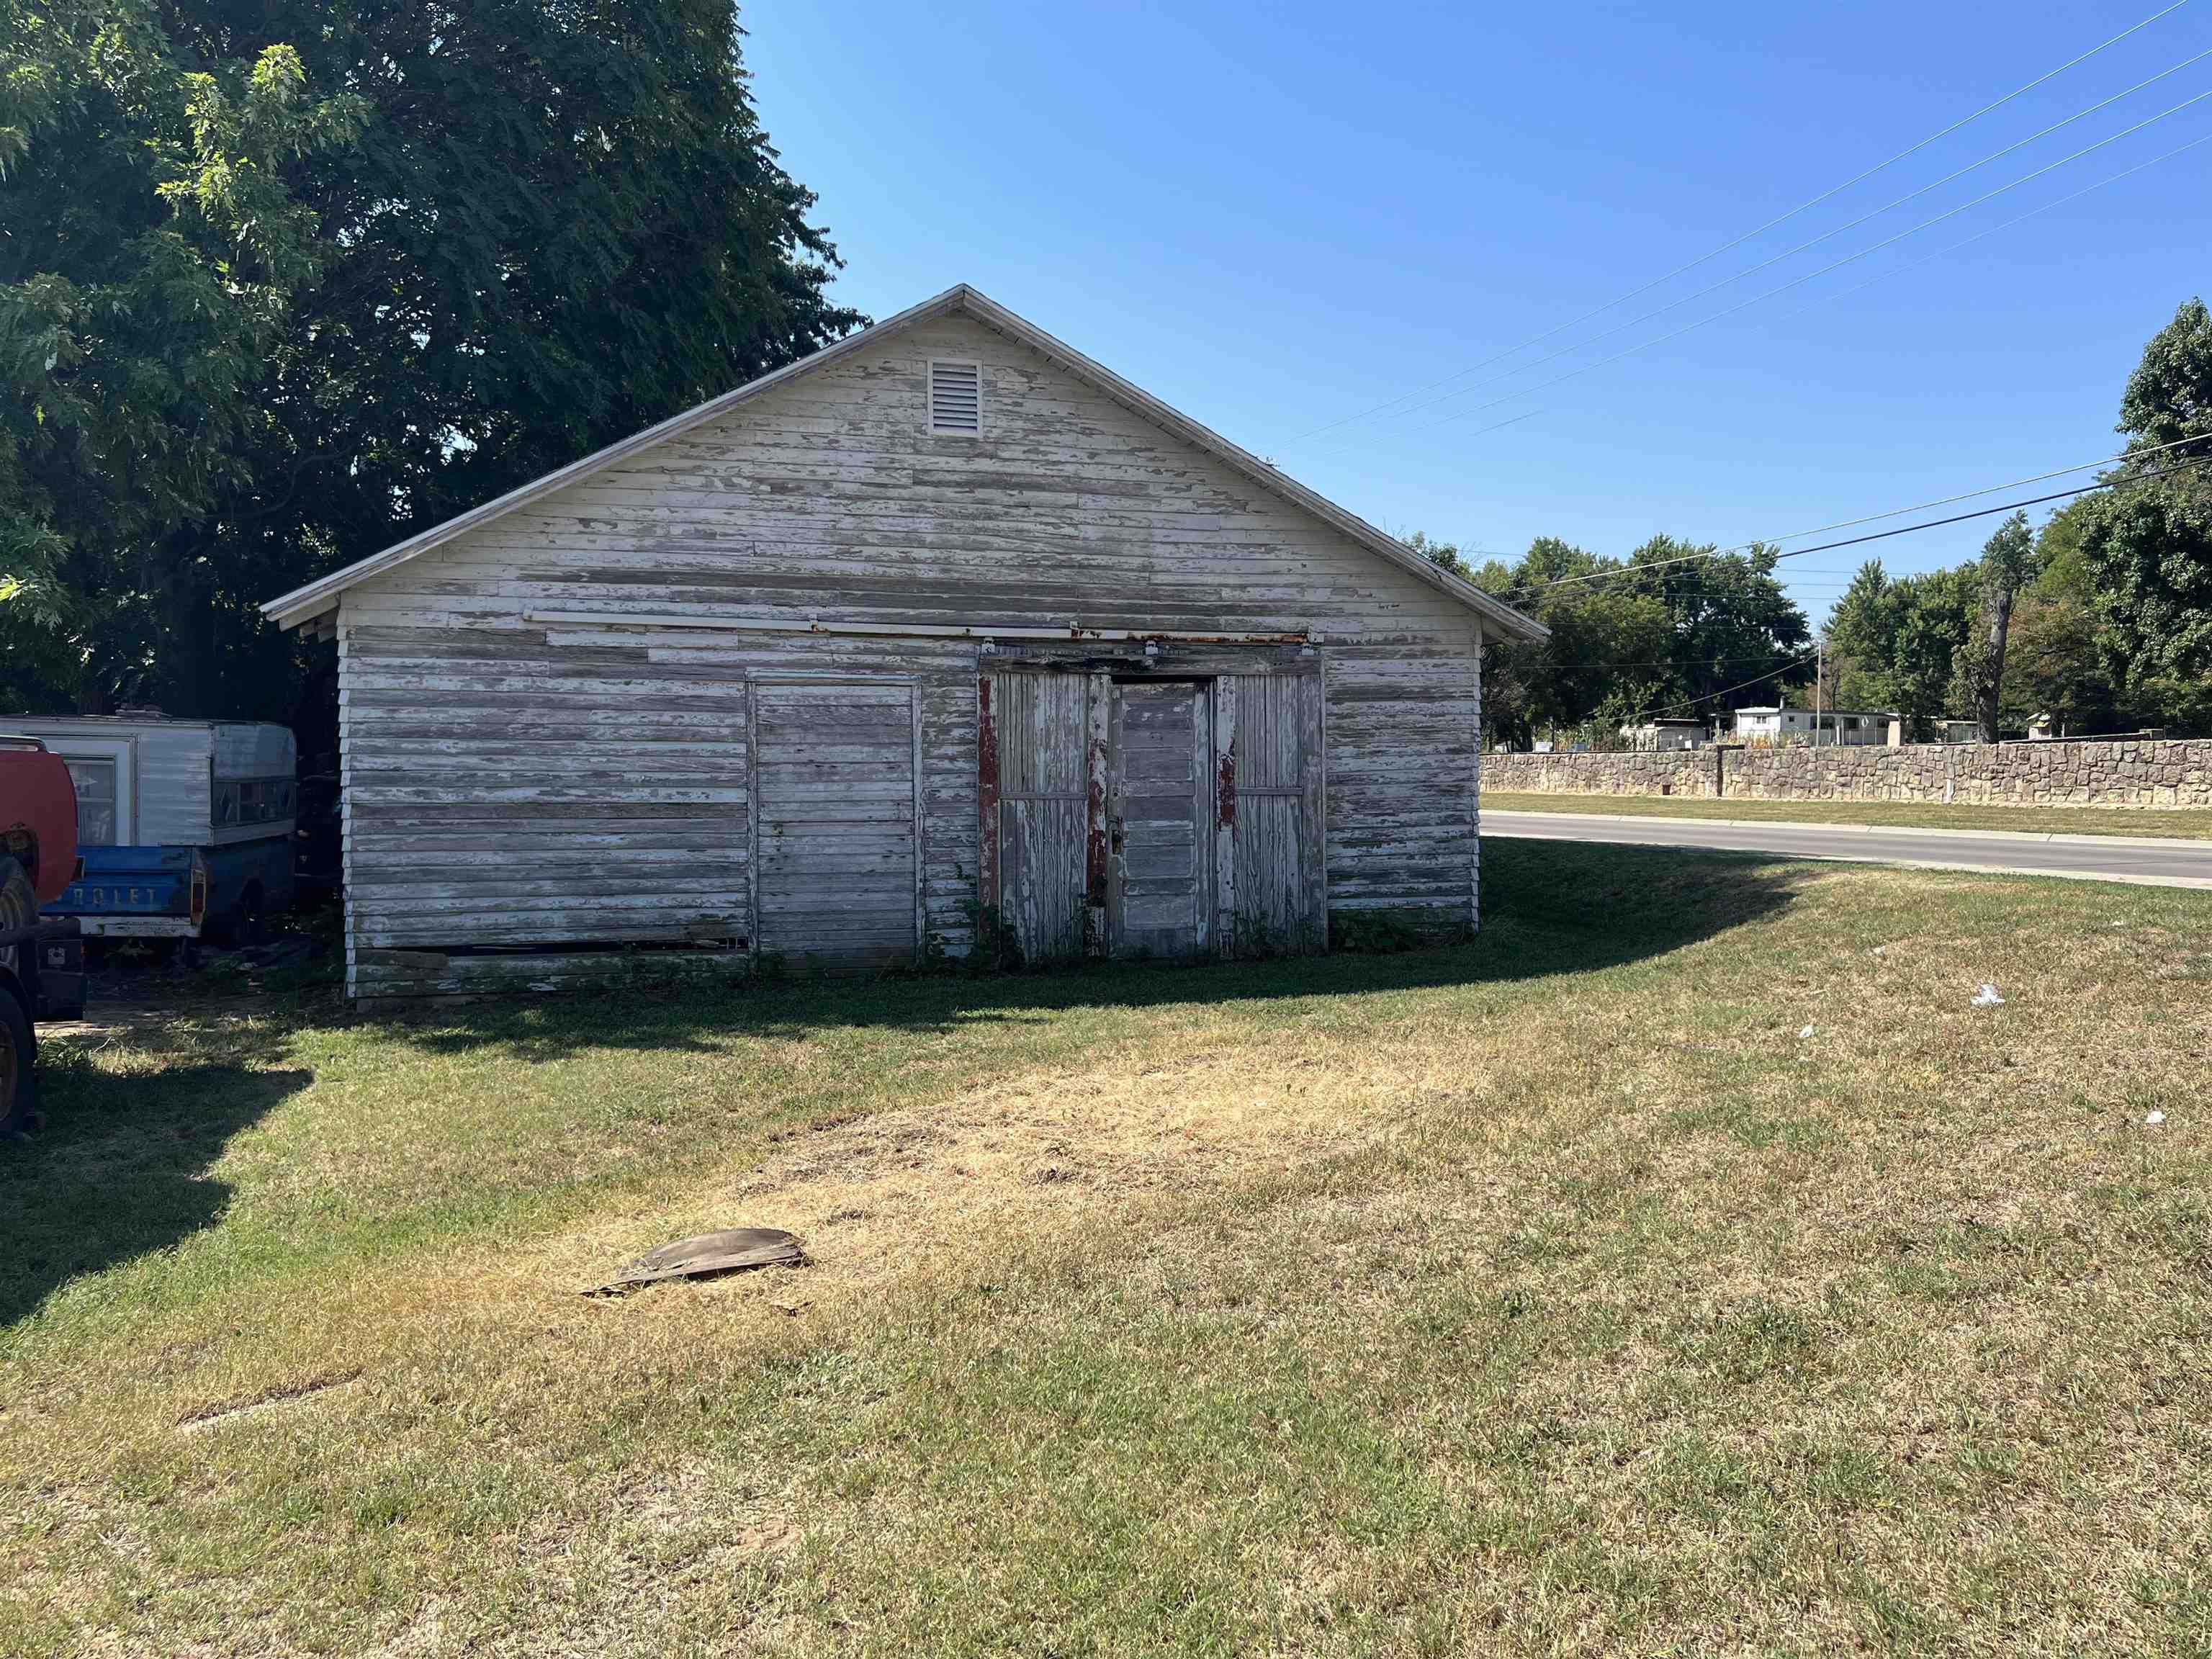 Looking for a garage to house your car collection? Maybe you're looking for a shop for storage or hobby? Put on your thinking caps and get creative! Call the listing agent to see this property.